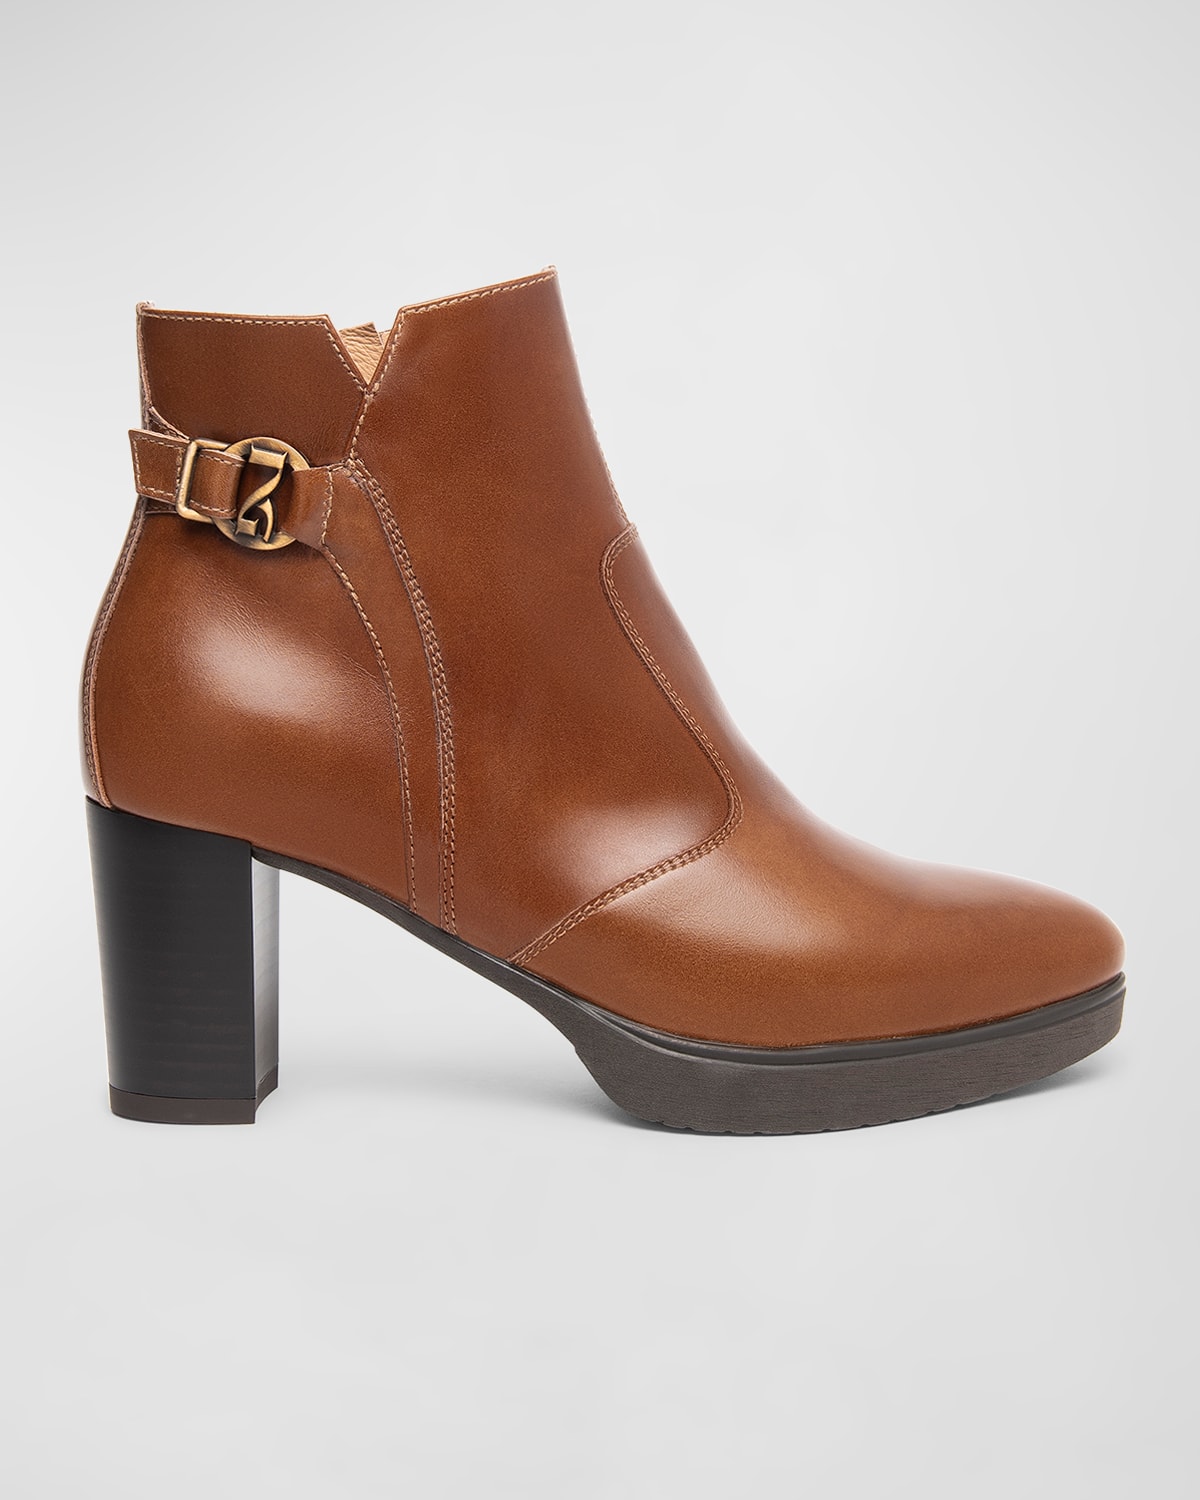 Leather Buckle Ankle Booties